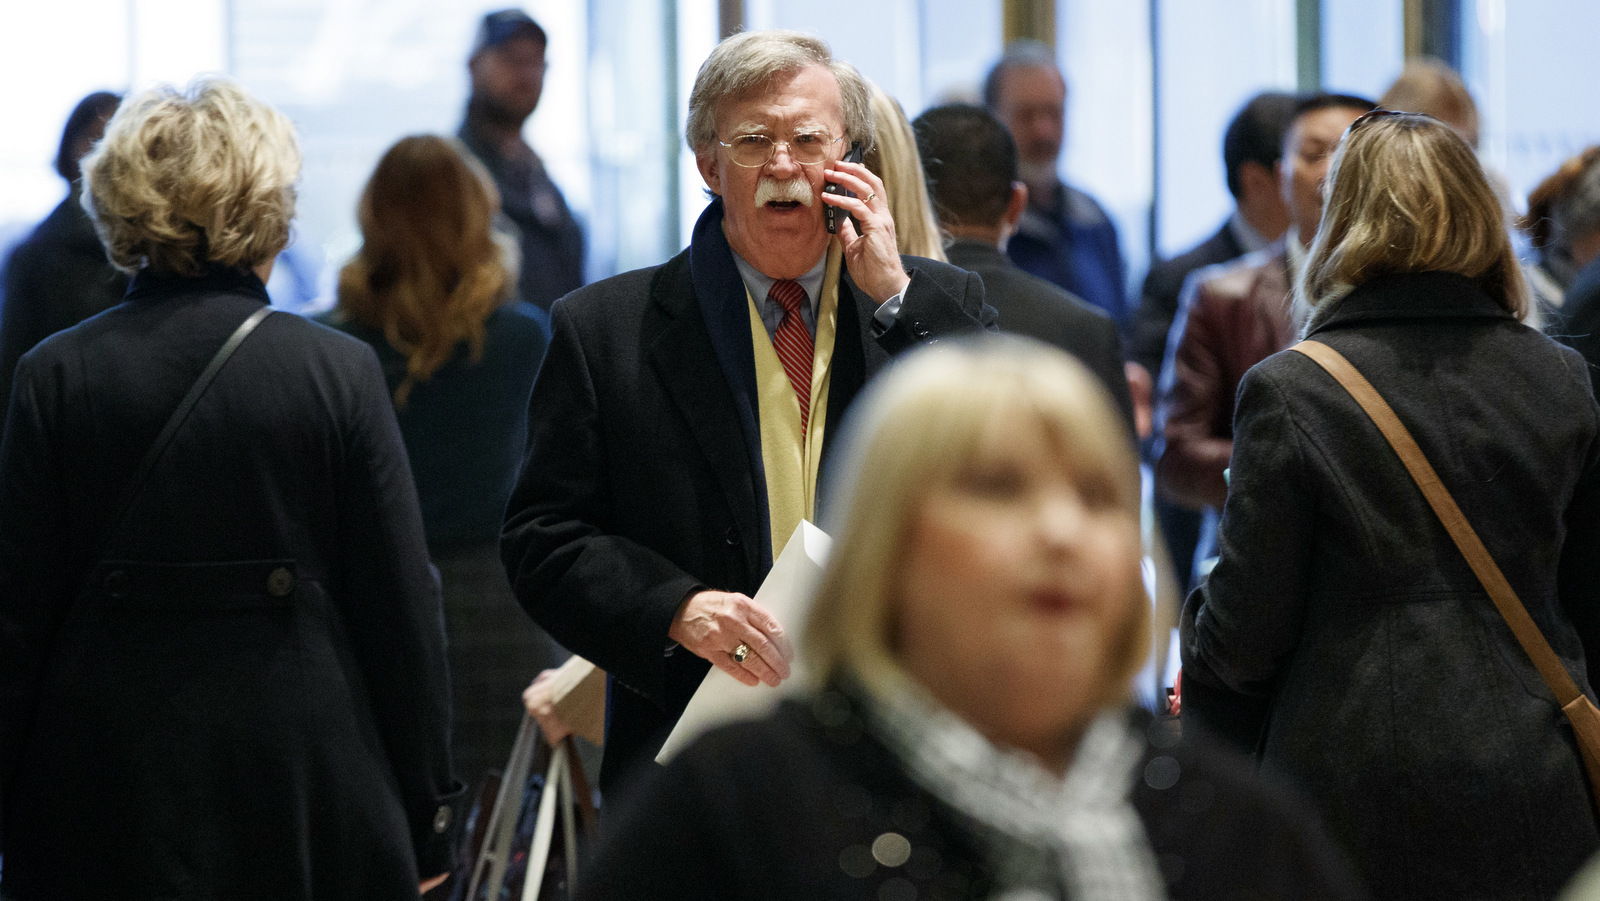 John Bolton, the former U.S. ambassador to the United Nations, arrives at Trump Tower for a meeting with President-elect Donald Trump, Friday, Dec. 2, 2016, in New York. (AP/Evan Vucci)